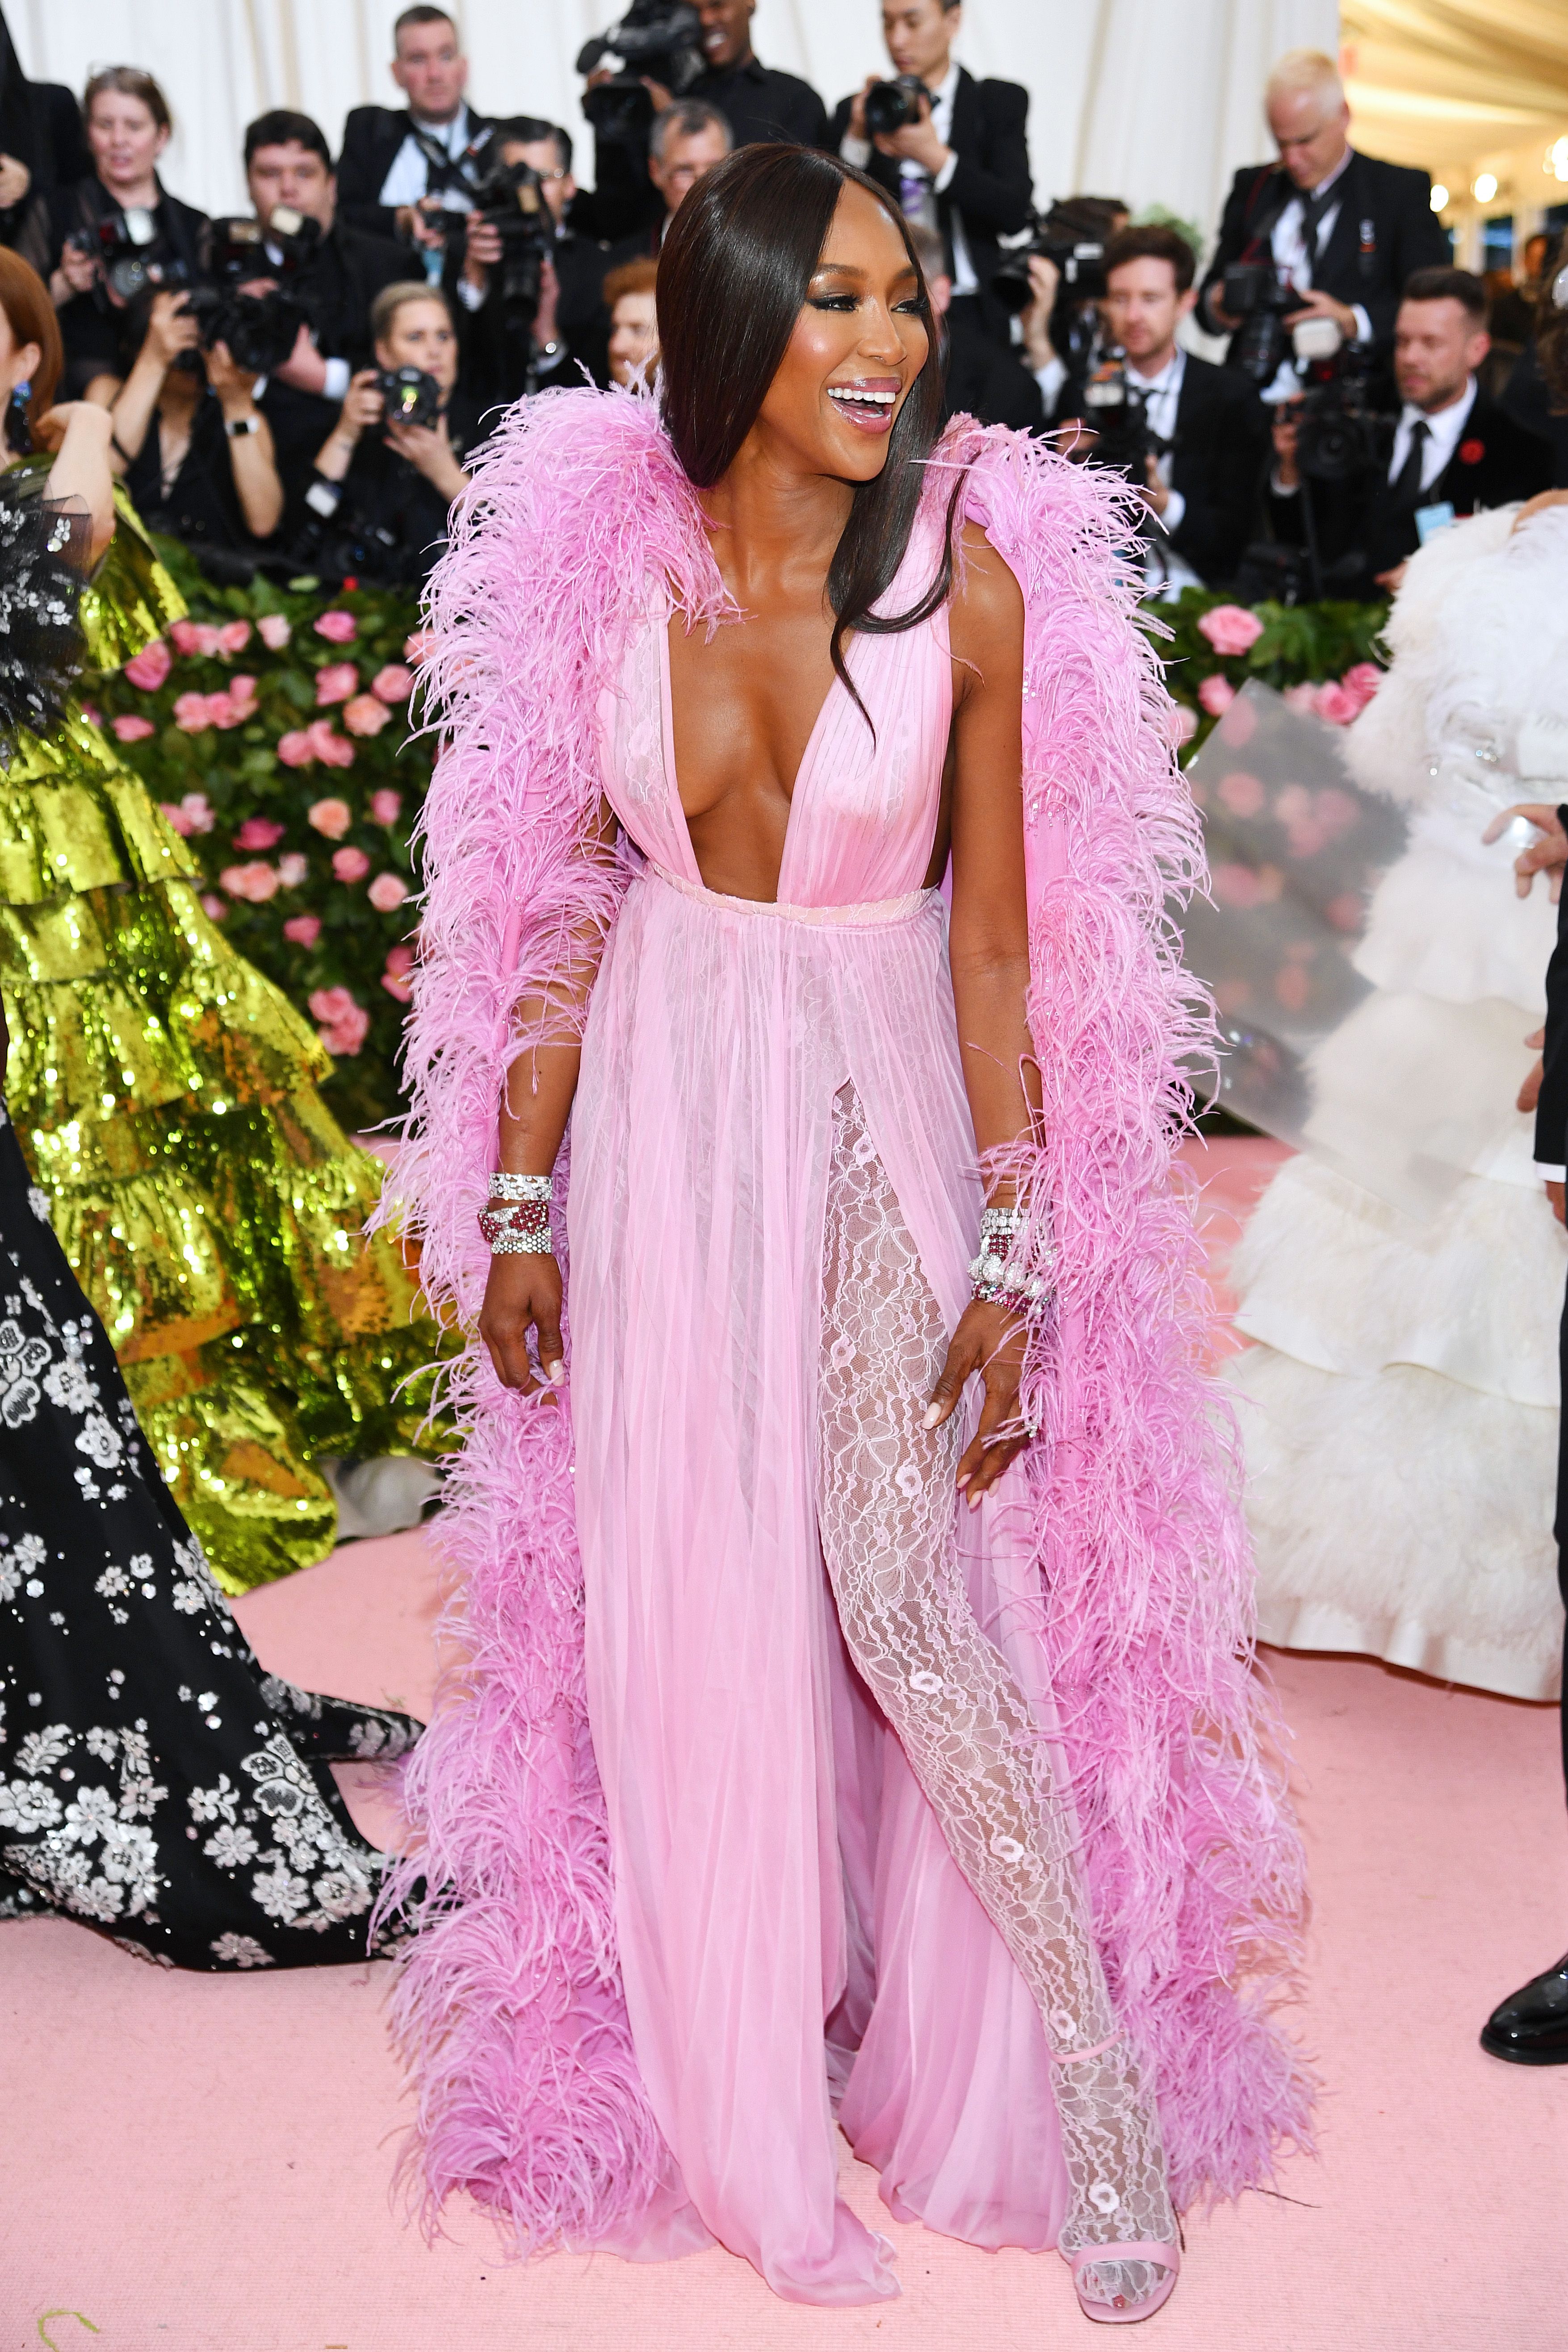 Naomi Campbell attends The 2019 Met Gala Celebrating Camp: Notes on Fashion at Metropolitan Museum of Art on May 06, 2019. | Source: Getty Images